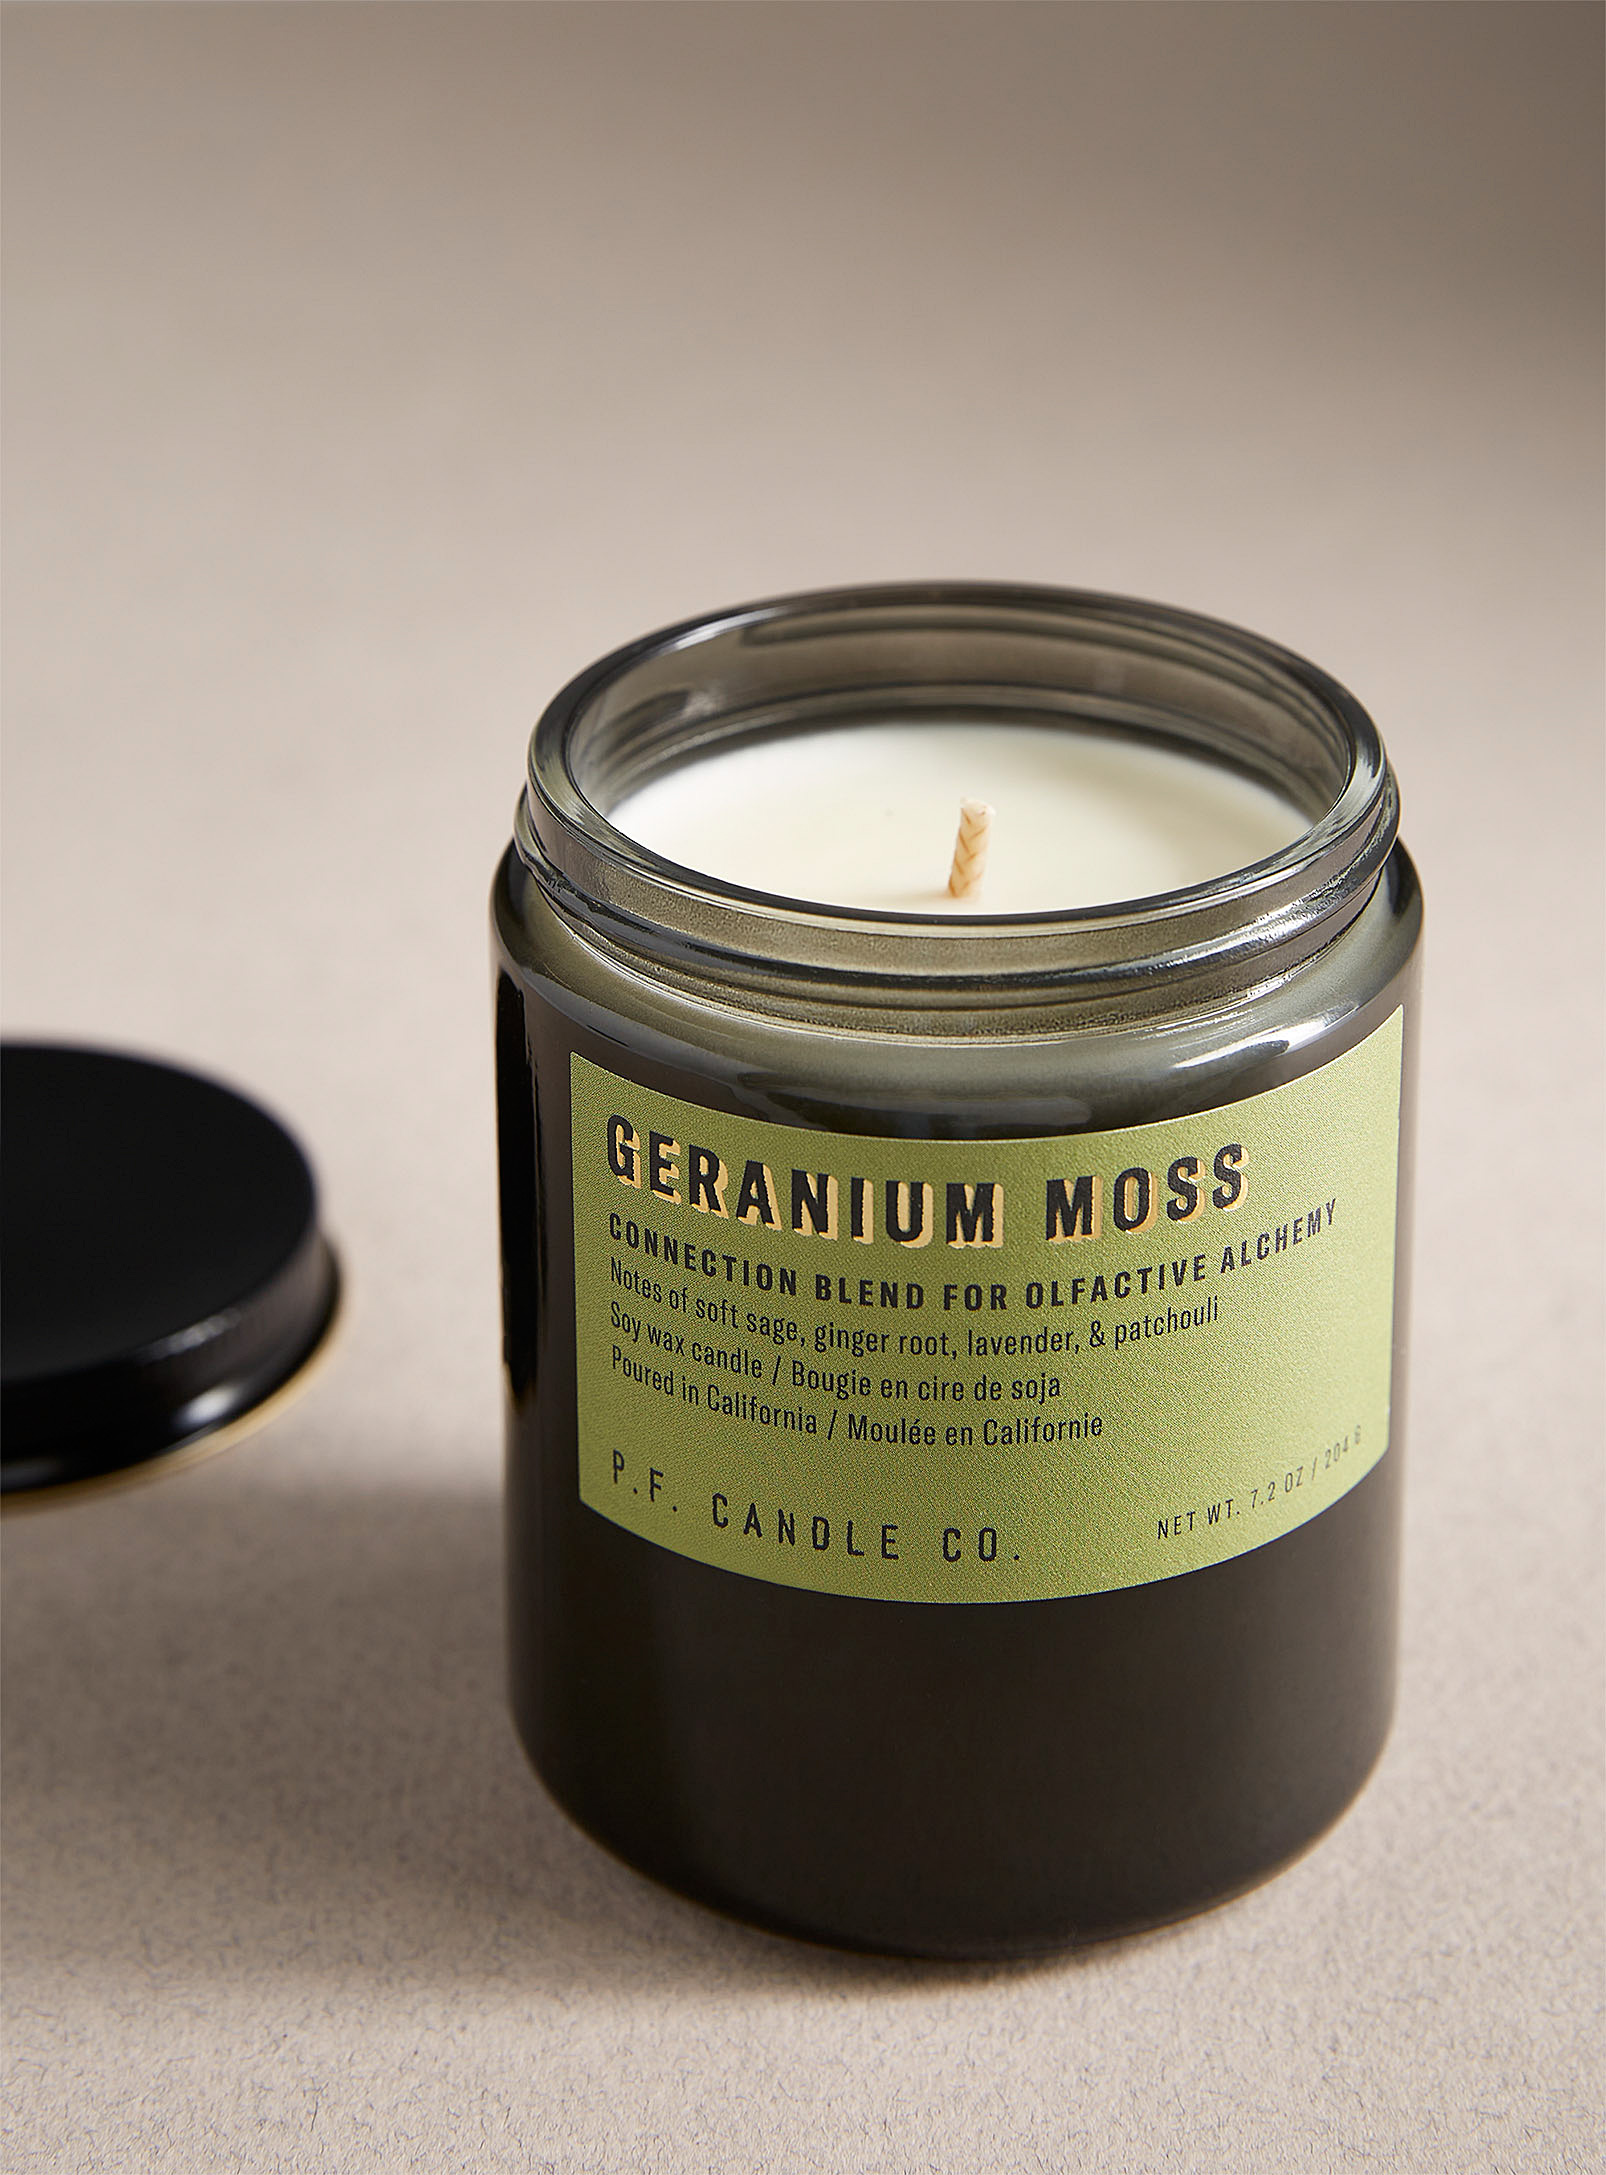 P.F. Candle Co. - Geranium Moss scented candle